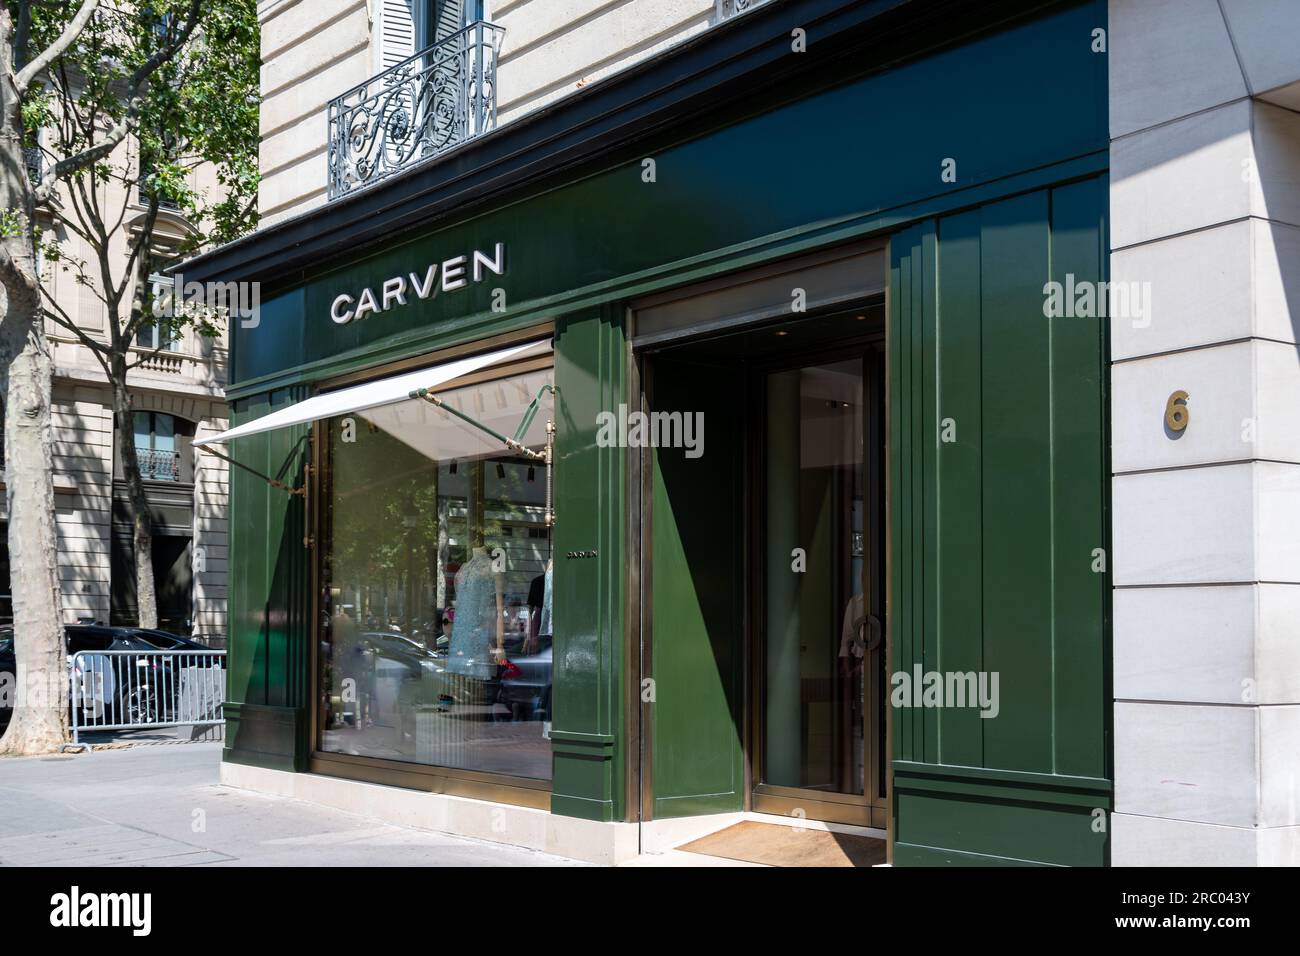 Exterior view of a Carven boutique in the Champs-Elysees district of Paris, France. Carven is a French ready-to-wear fashion clothing brand Stock Photo